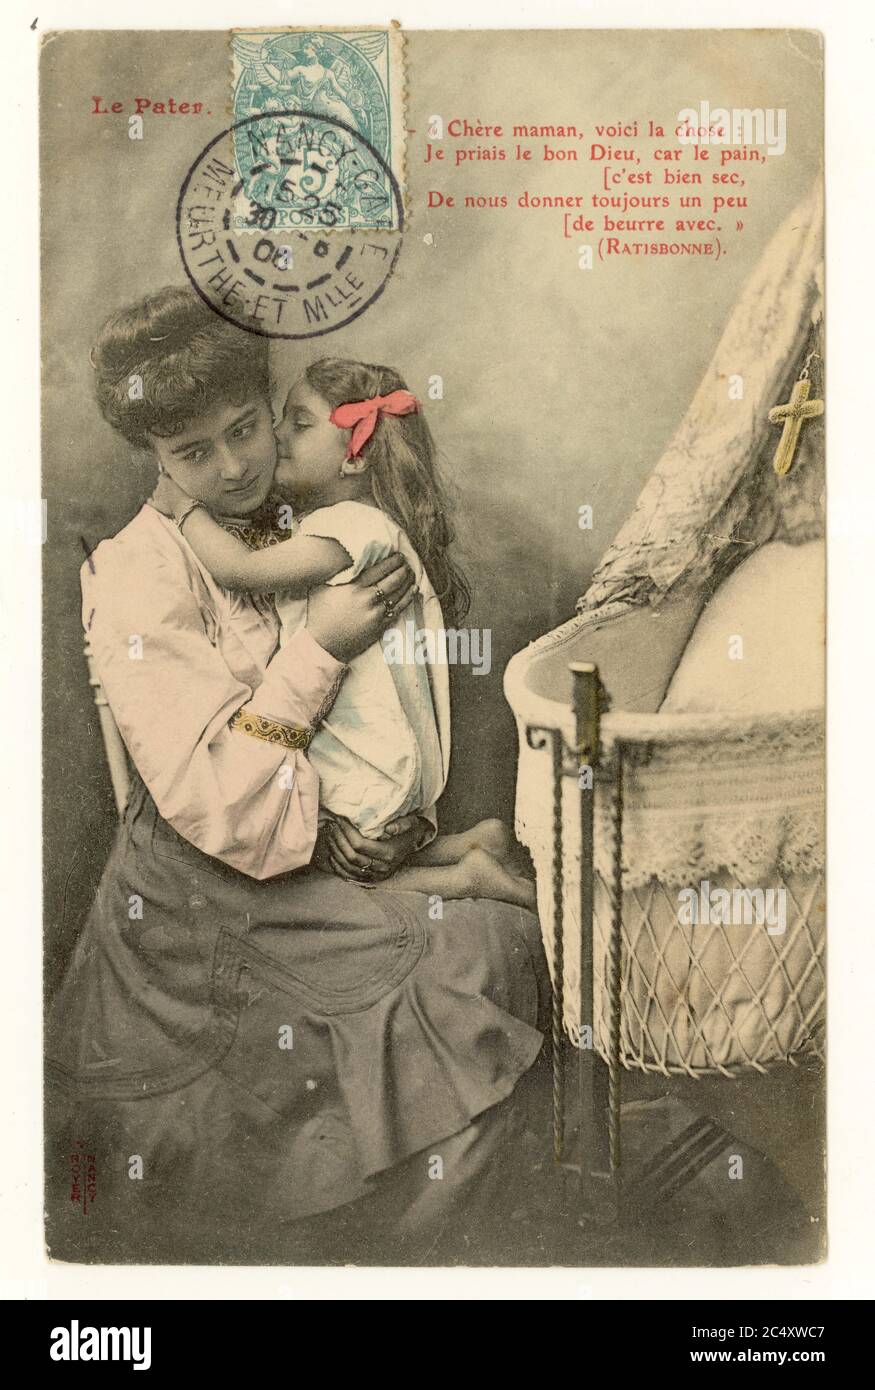 Charming early 1900's French sentimental tinted greetings postcard - mother and cute young daughter, beside cot, Ratisbonne quote,  blue stamp on front of the image, France, posted August 1906. Stock Photo